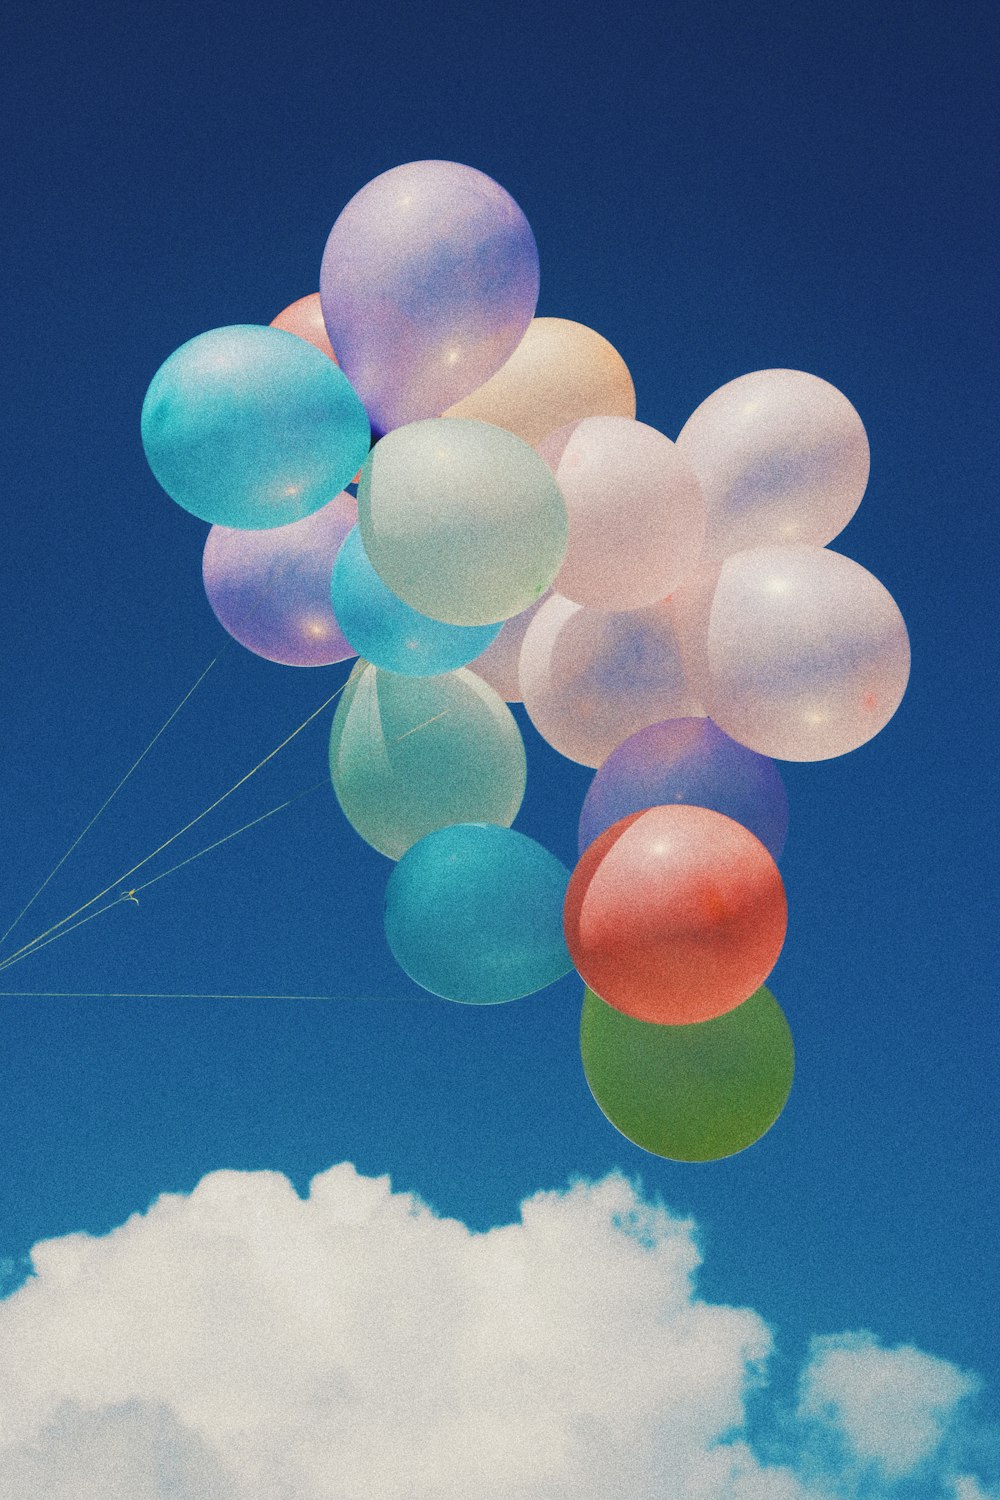 white, blue, and purple balloons